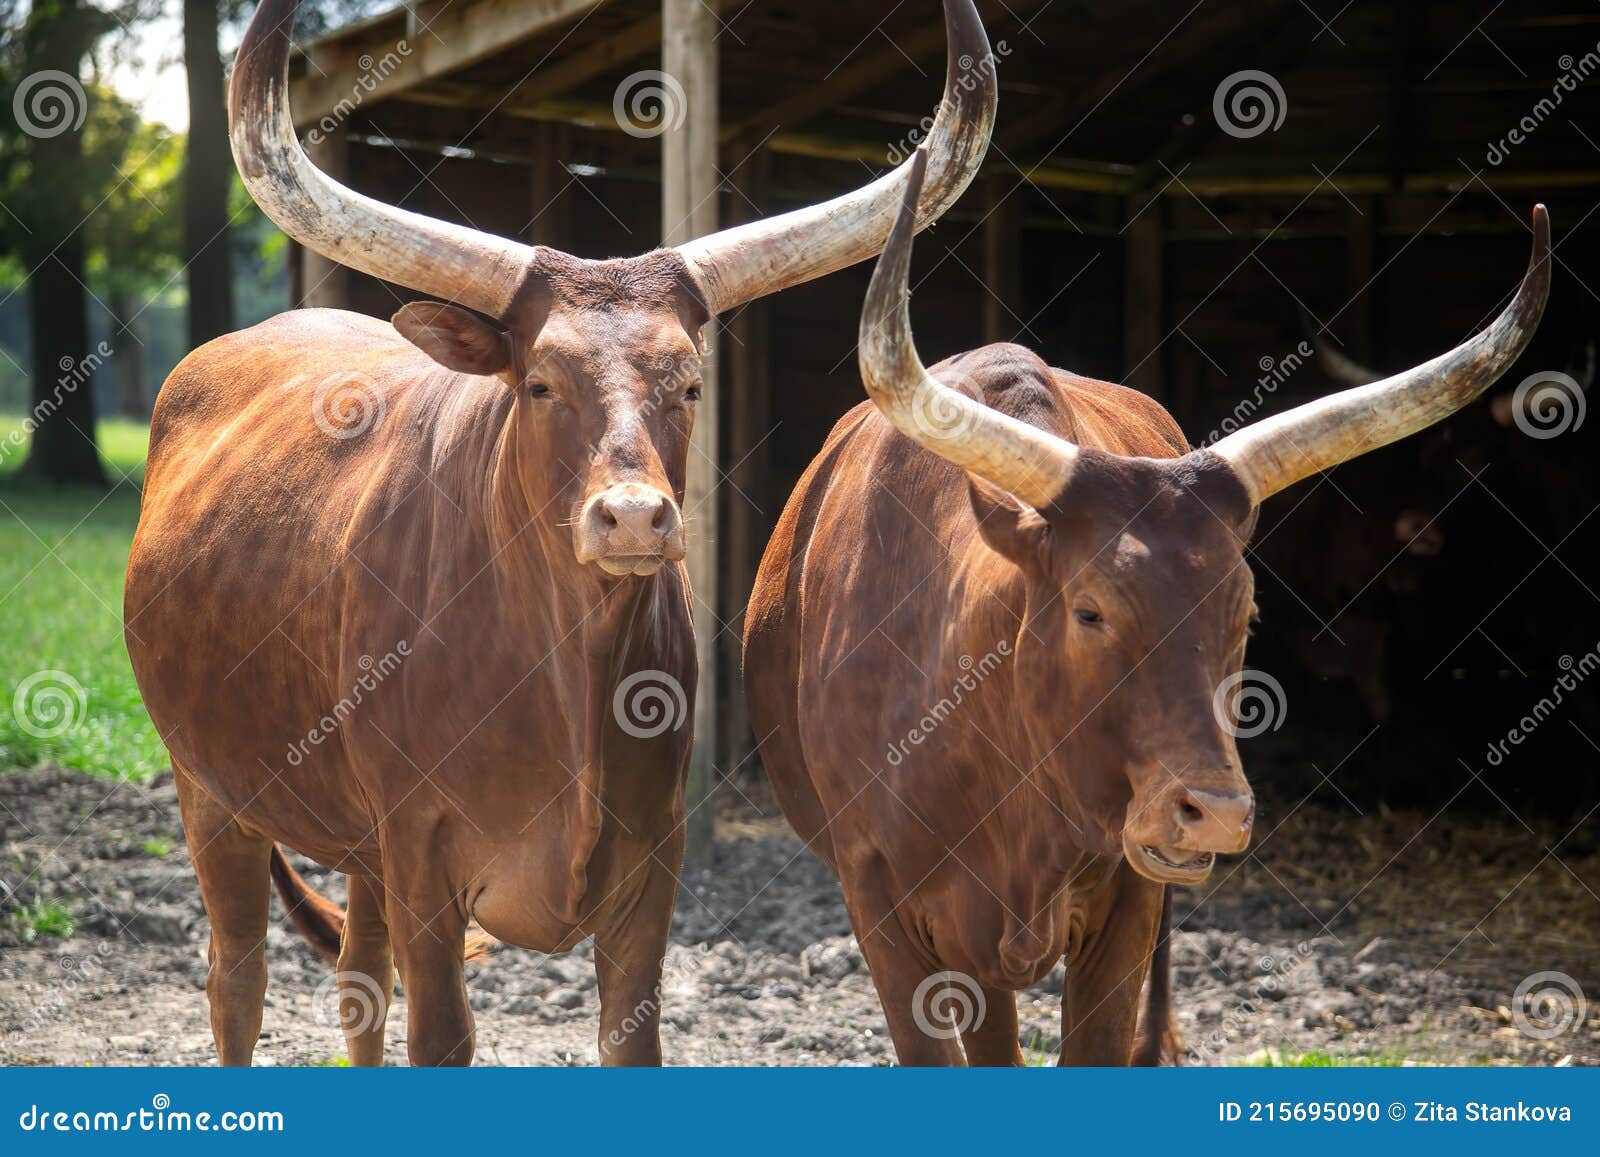 African Cows with Long Horns, Ankole Cattle. Stock Photo - Image of animal,  horn: 215695090